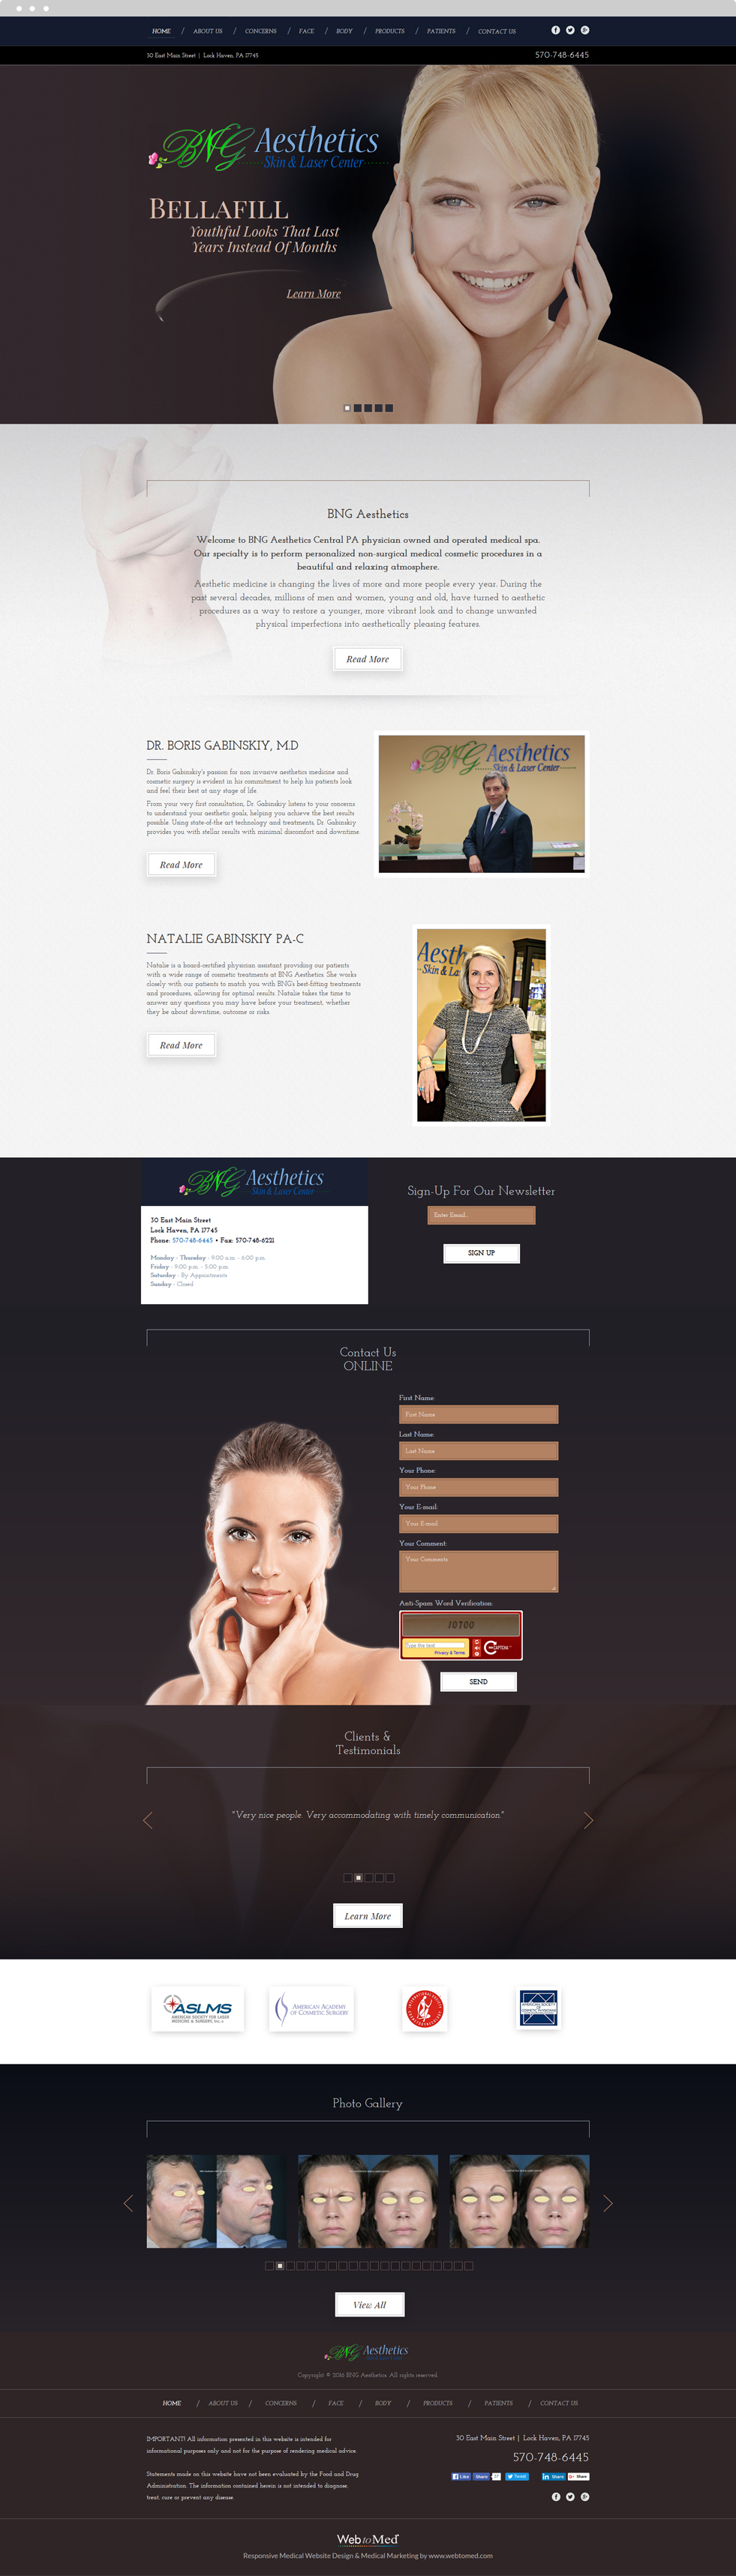 Plastic Surgery Website Design - BNG Aesthetics - Homepage